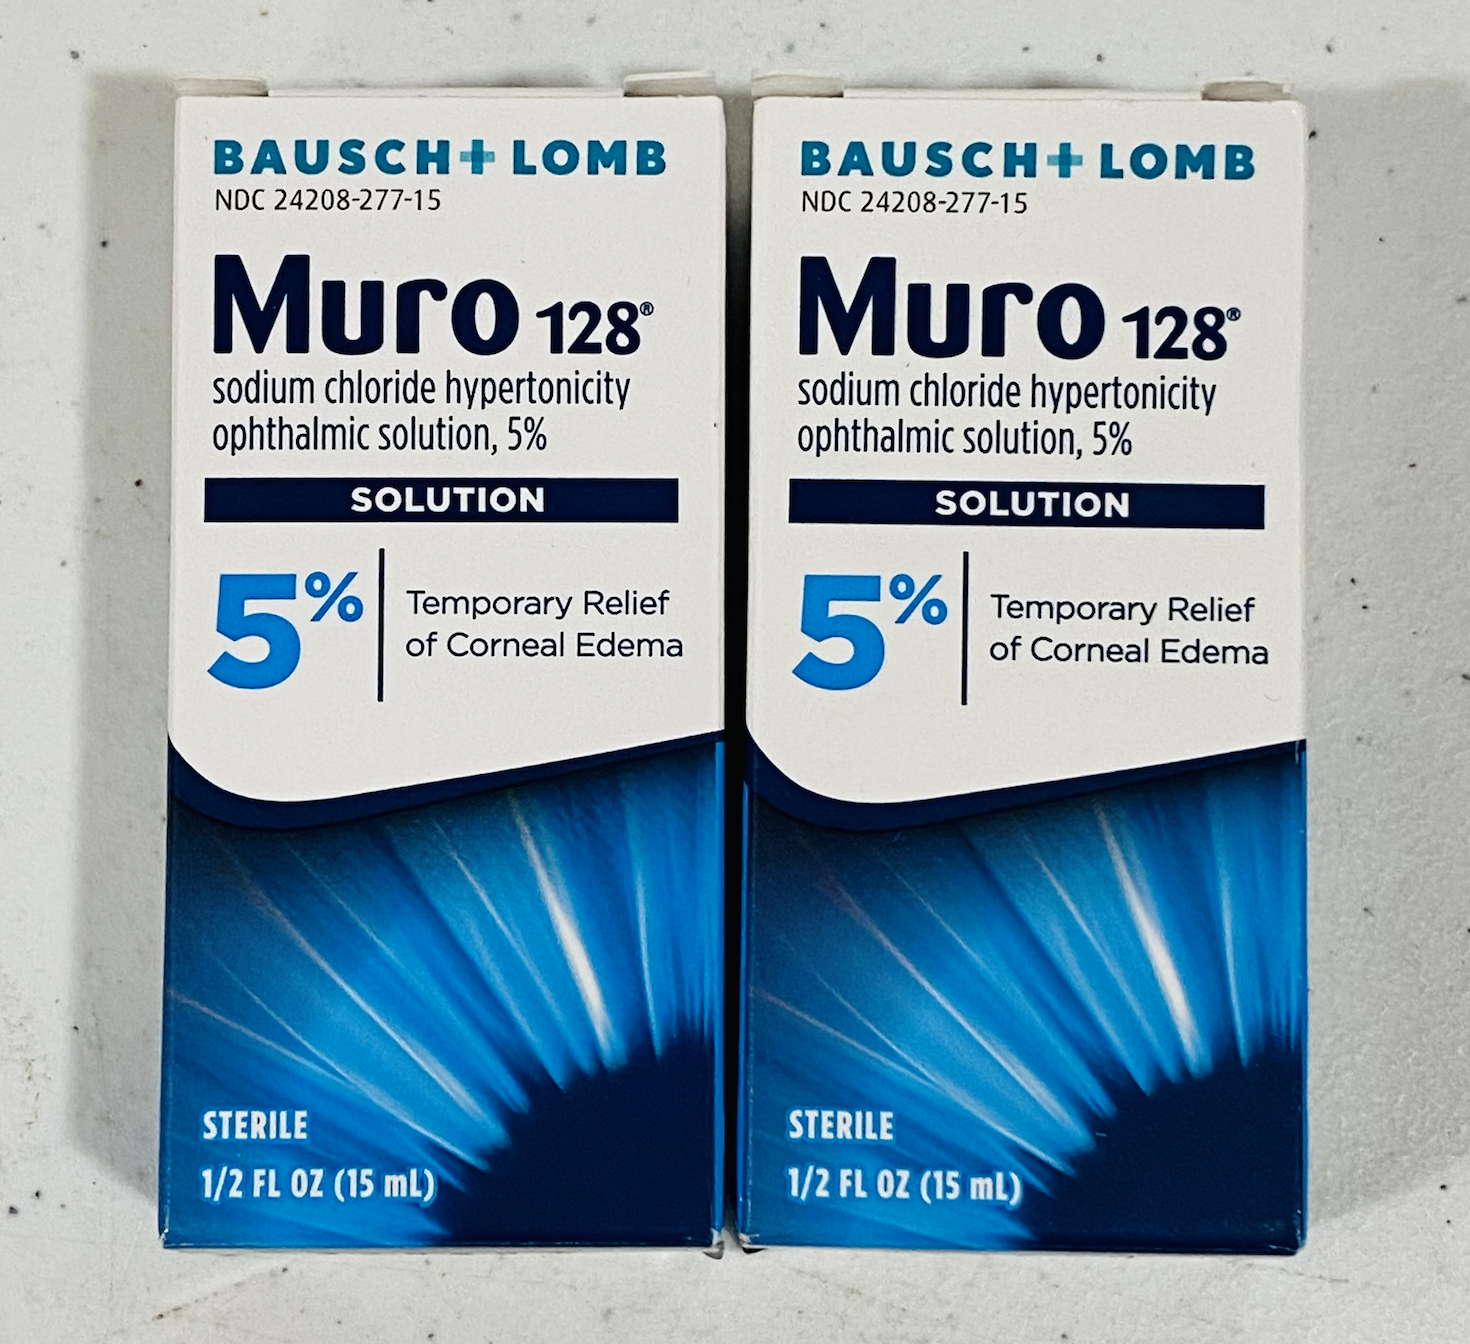 2-Pack - In a popularity Bausch + Lomb MURO 0.5oz Max 85% OFF 128 Ophthalmic 5% Solution